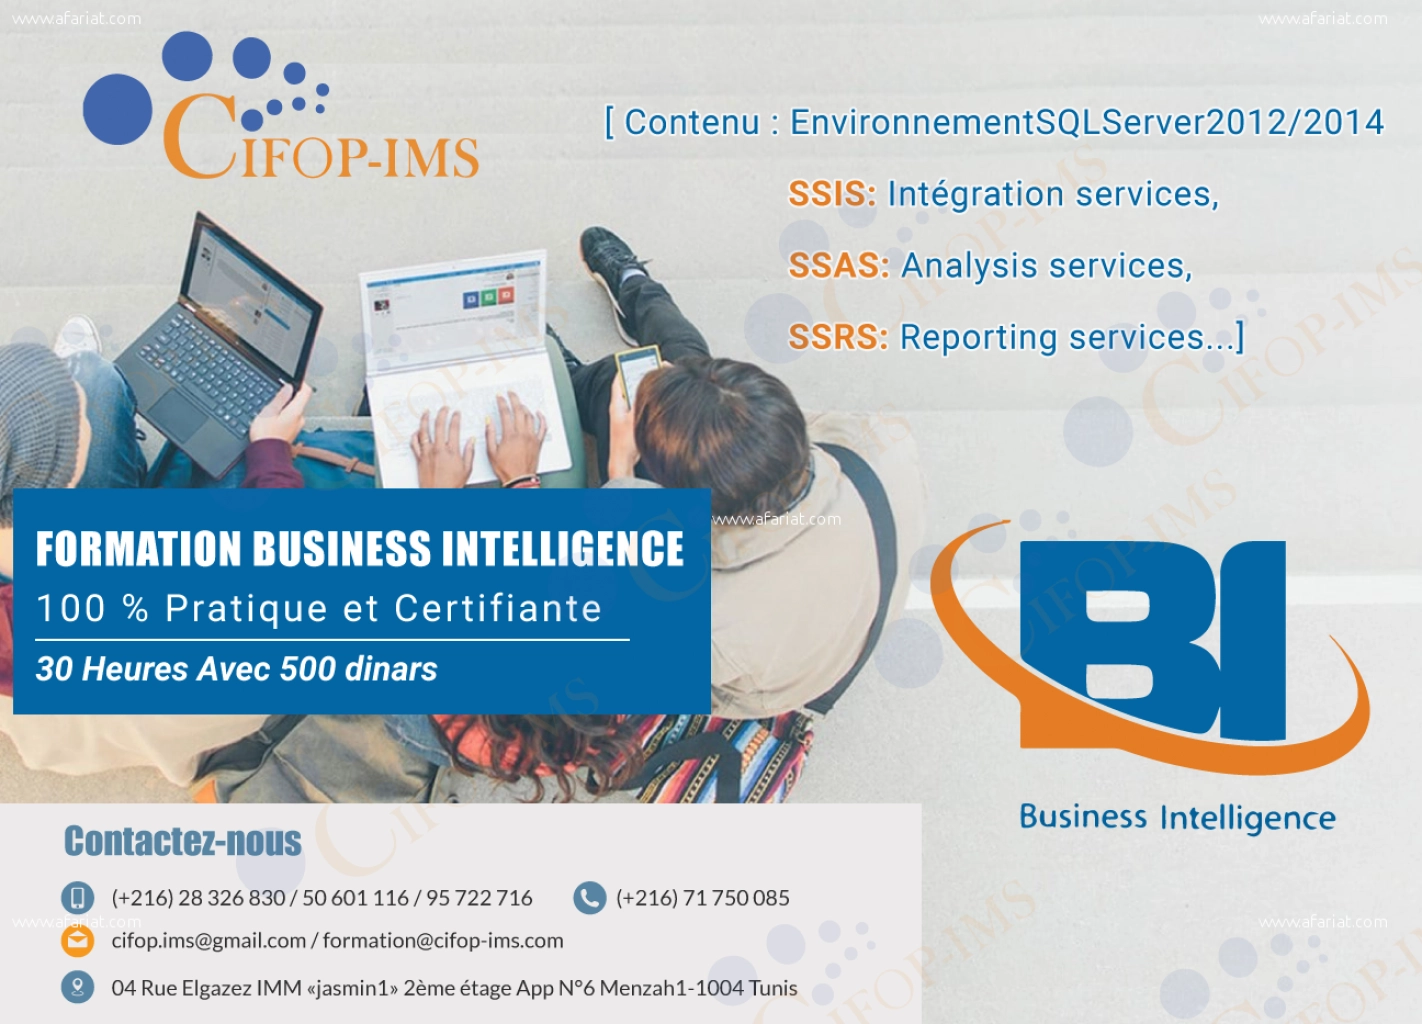 Formation Business Intelligence / GSM:25315269